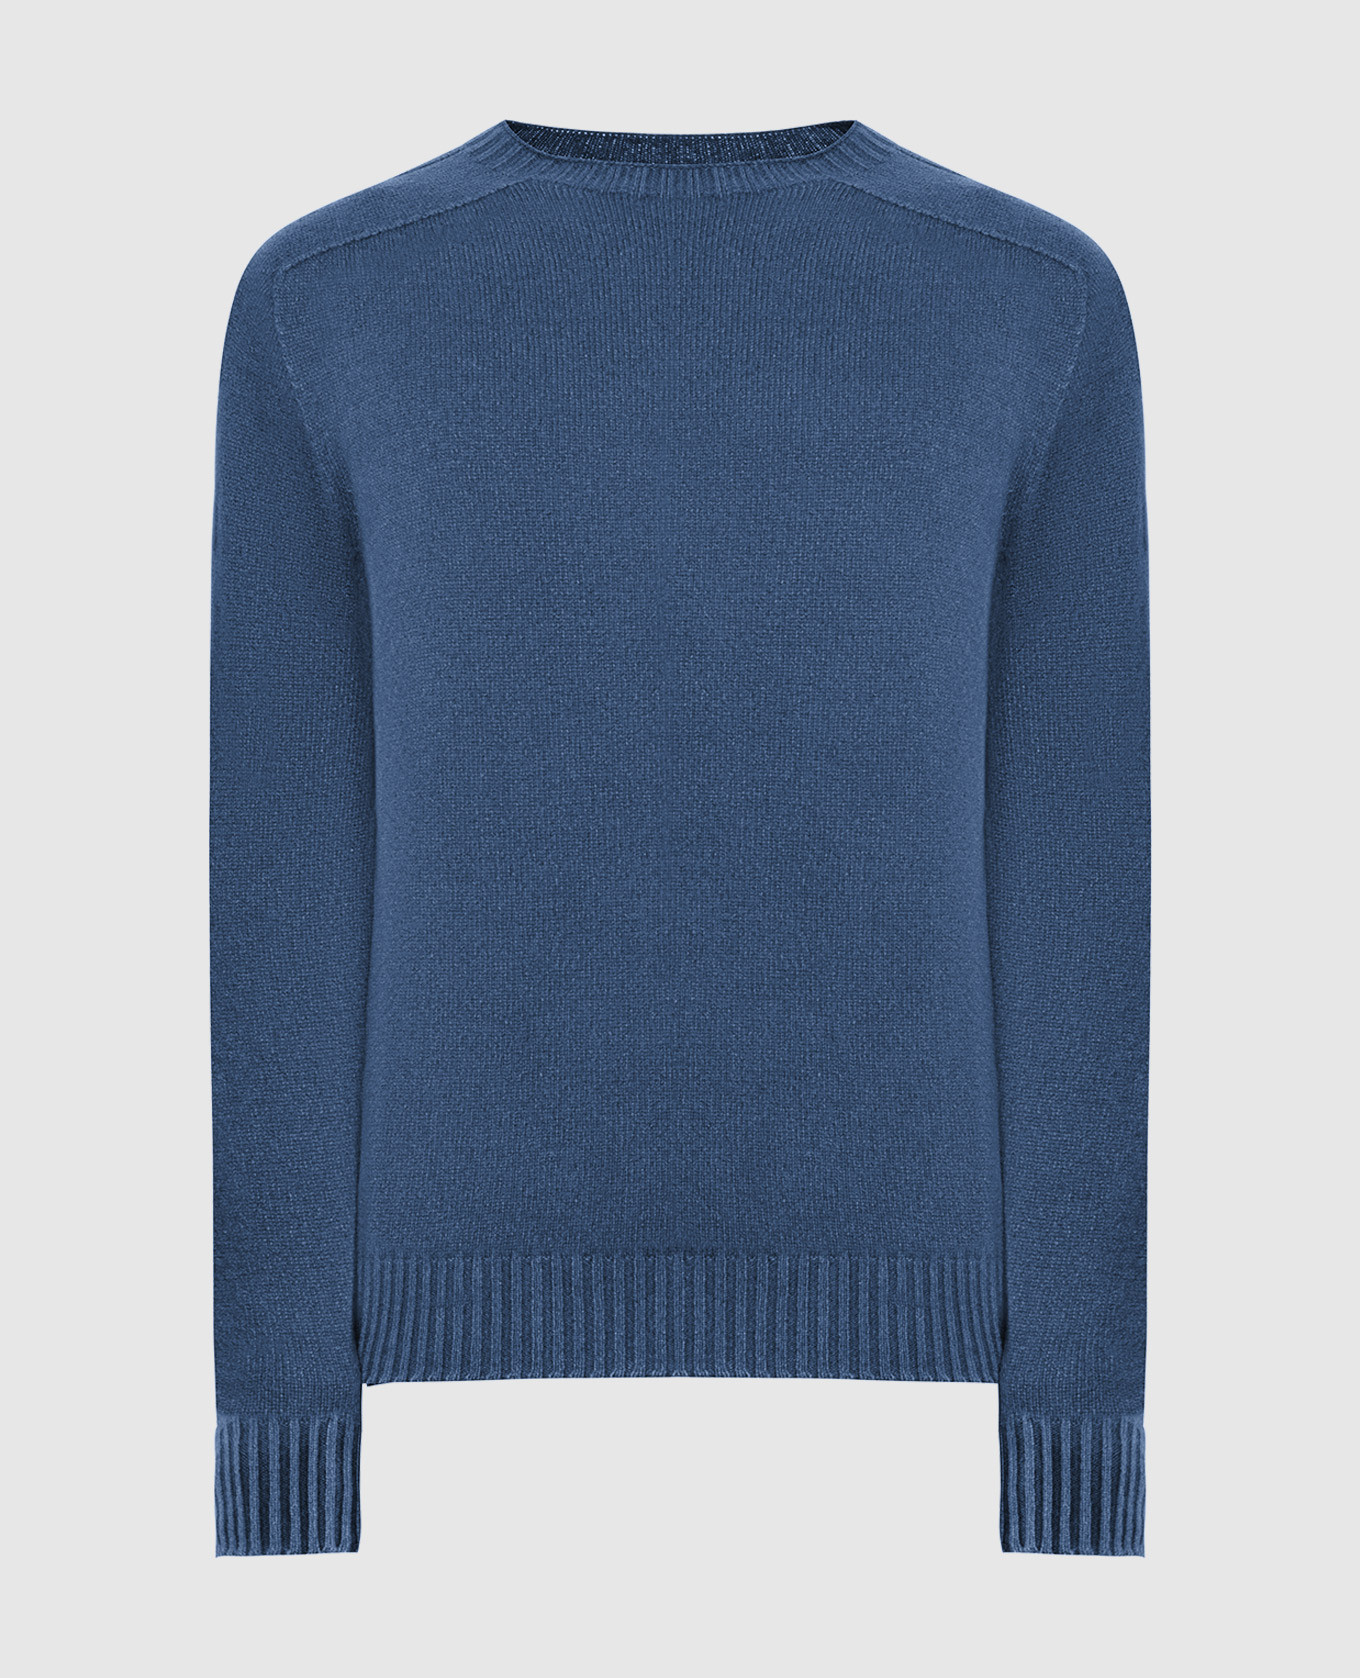 Double-sided blue cashmere jumper